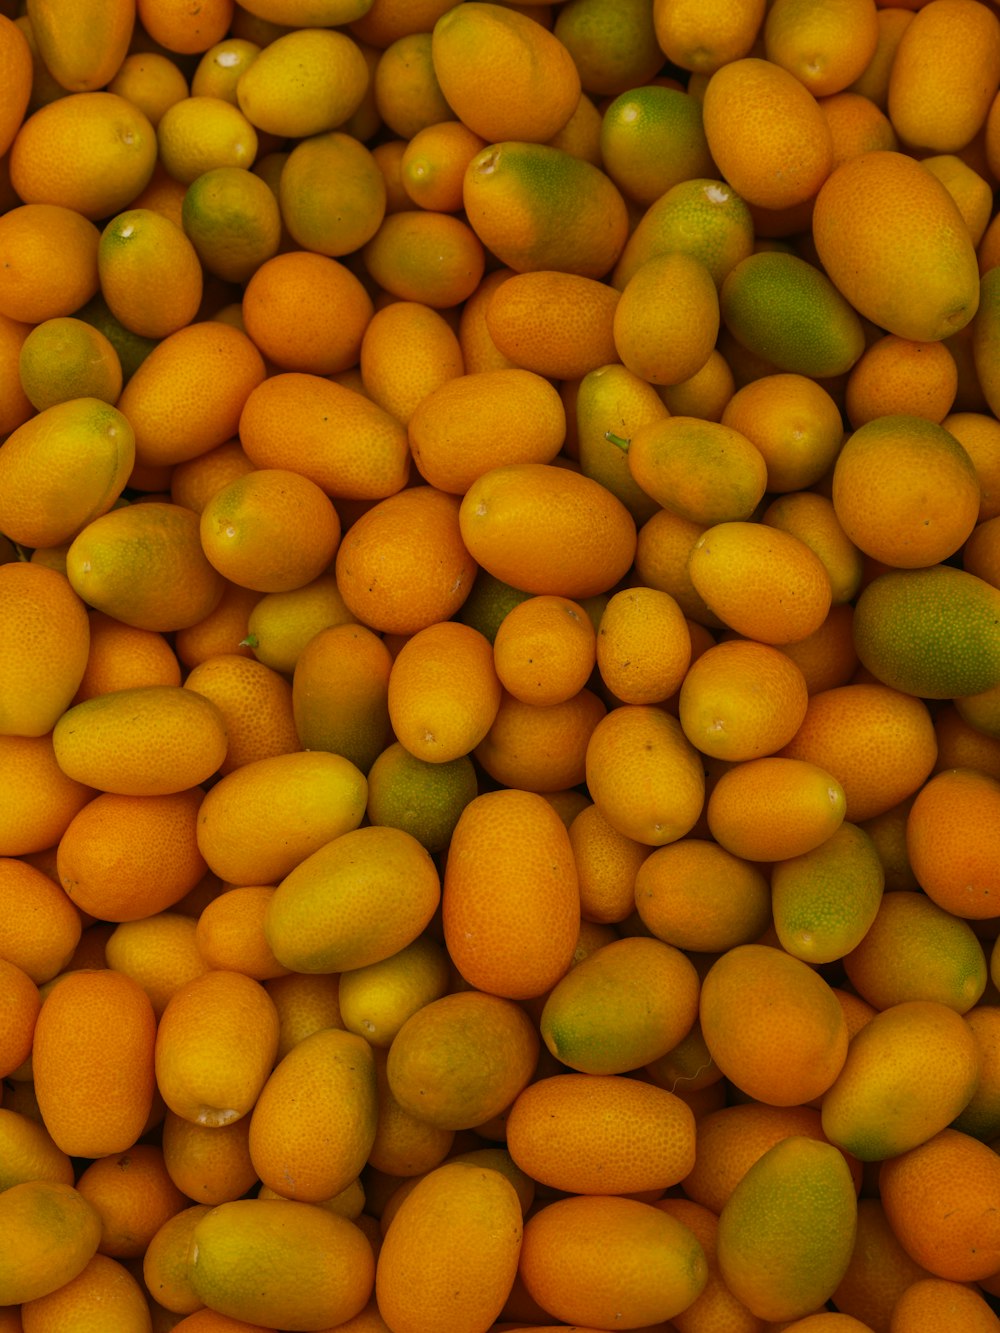 a pile of oranges and limes sitting next to each other